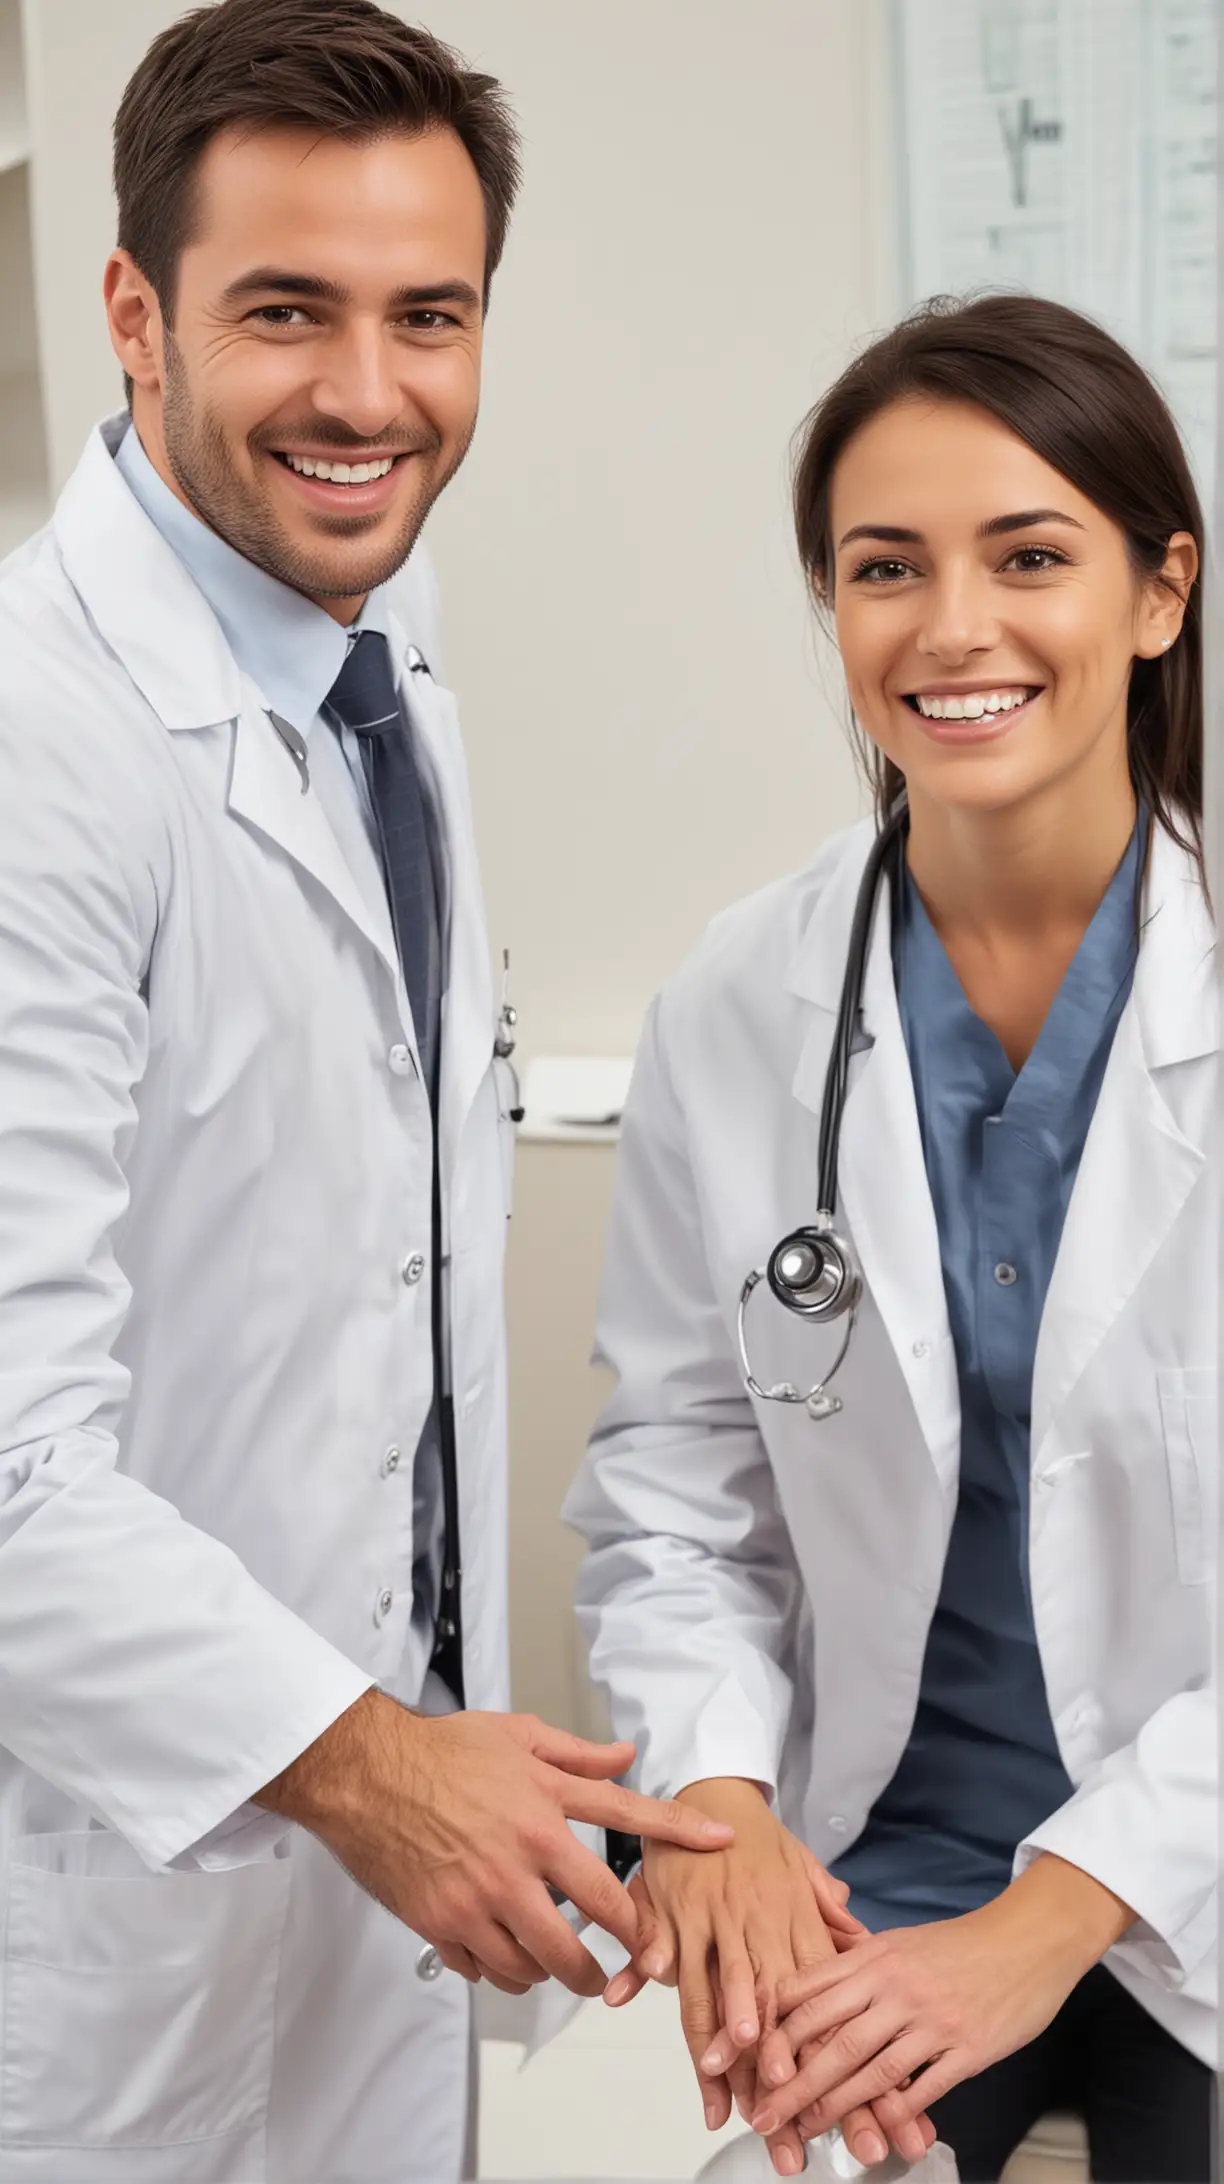 Happy Patient in Consultation with Doctor Wearing White Coat